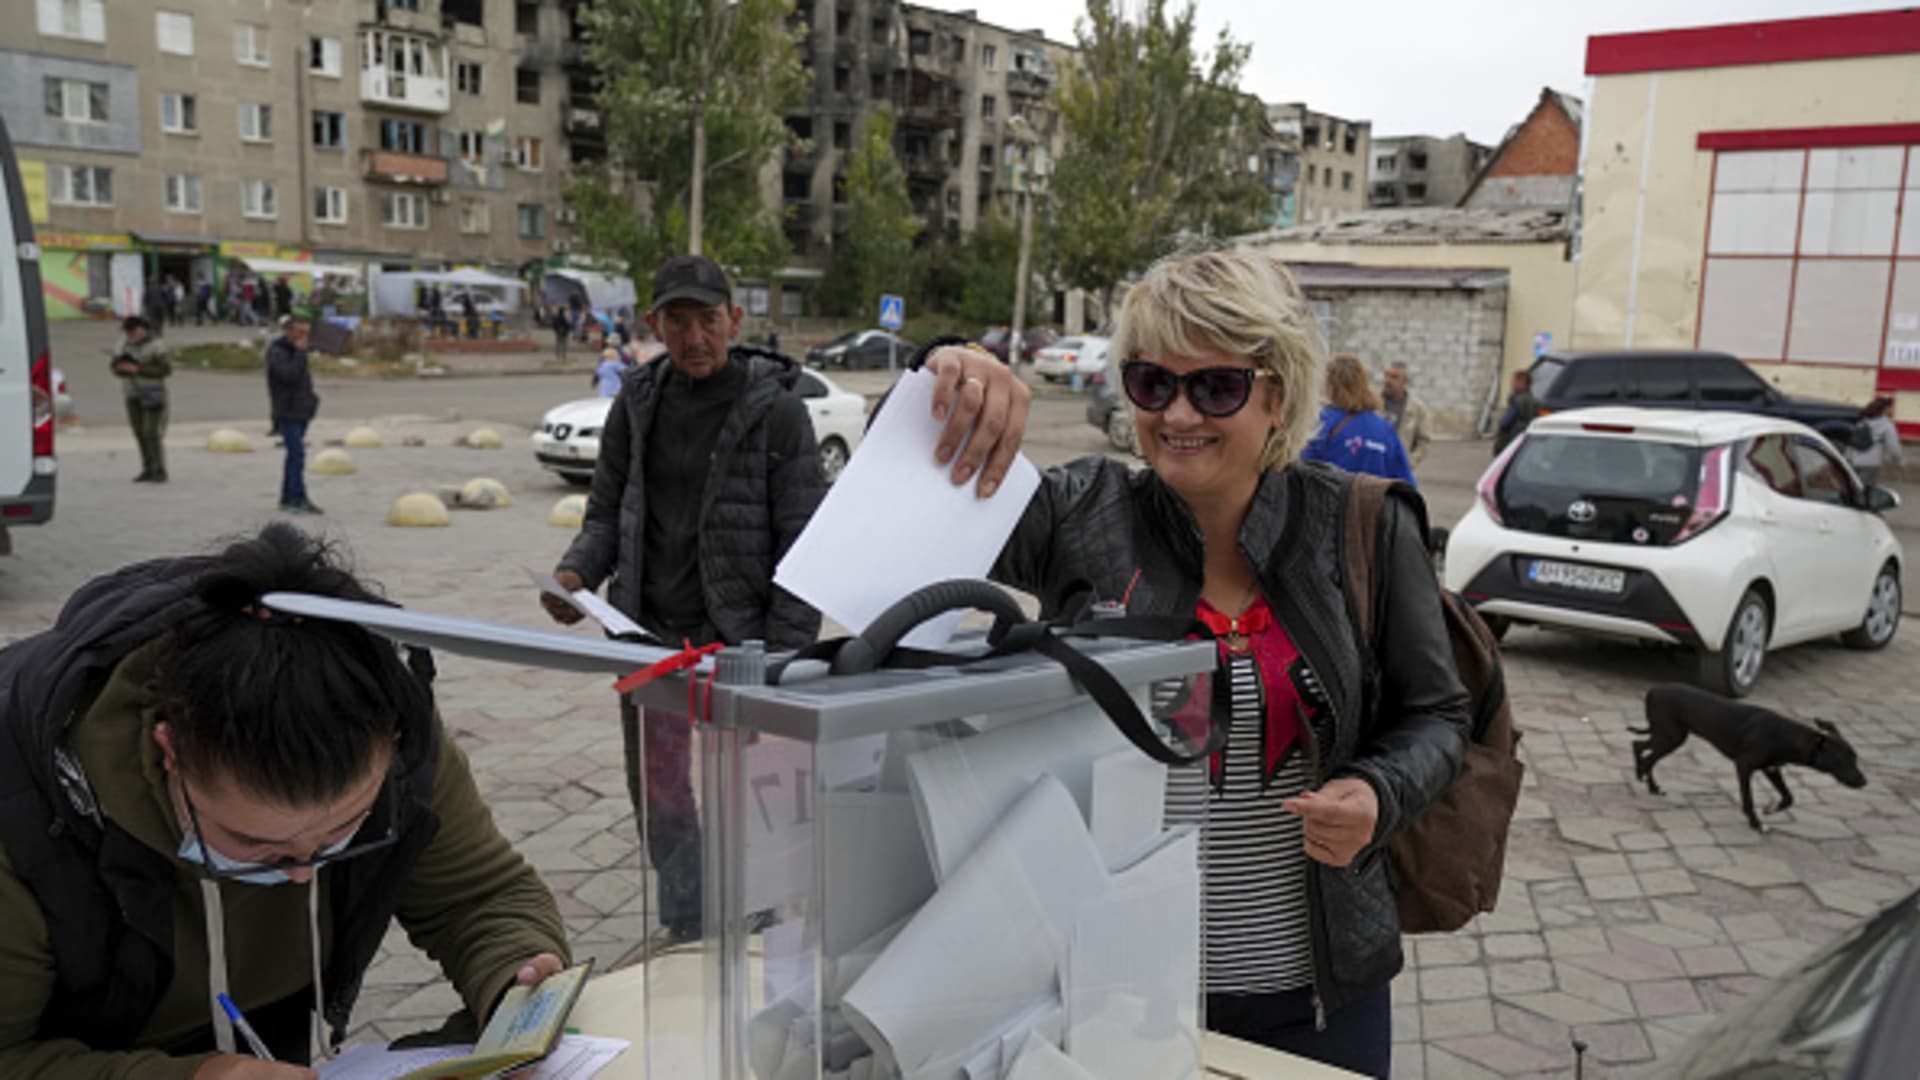 People cast their votes in controversial referendums in Mariupol, Donetsk Oblast, Ukraine on Sept. 26, 2022. Voting runs from Friday to Tuesday in Luhansk, Donetsk, Kherson and Zaporizhzhia. Voters are asked to decide if they want these regions to become part of Russia.